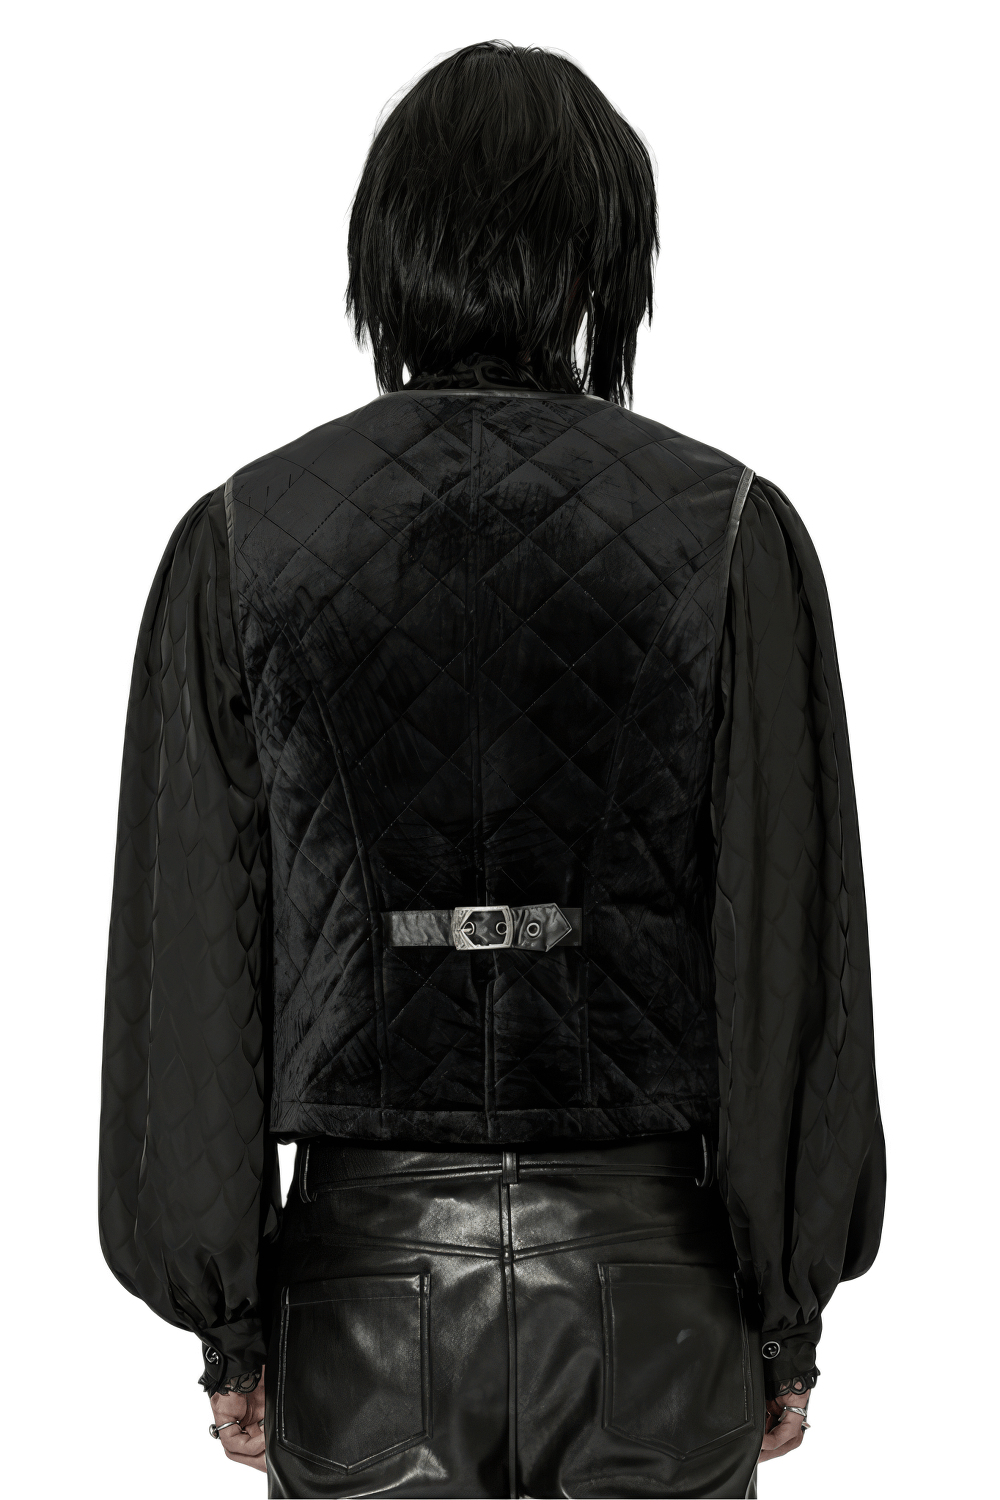 Gothic Quilted Men's Waistcoat with Metal Clasp Closure